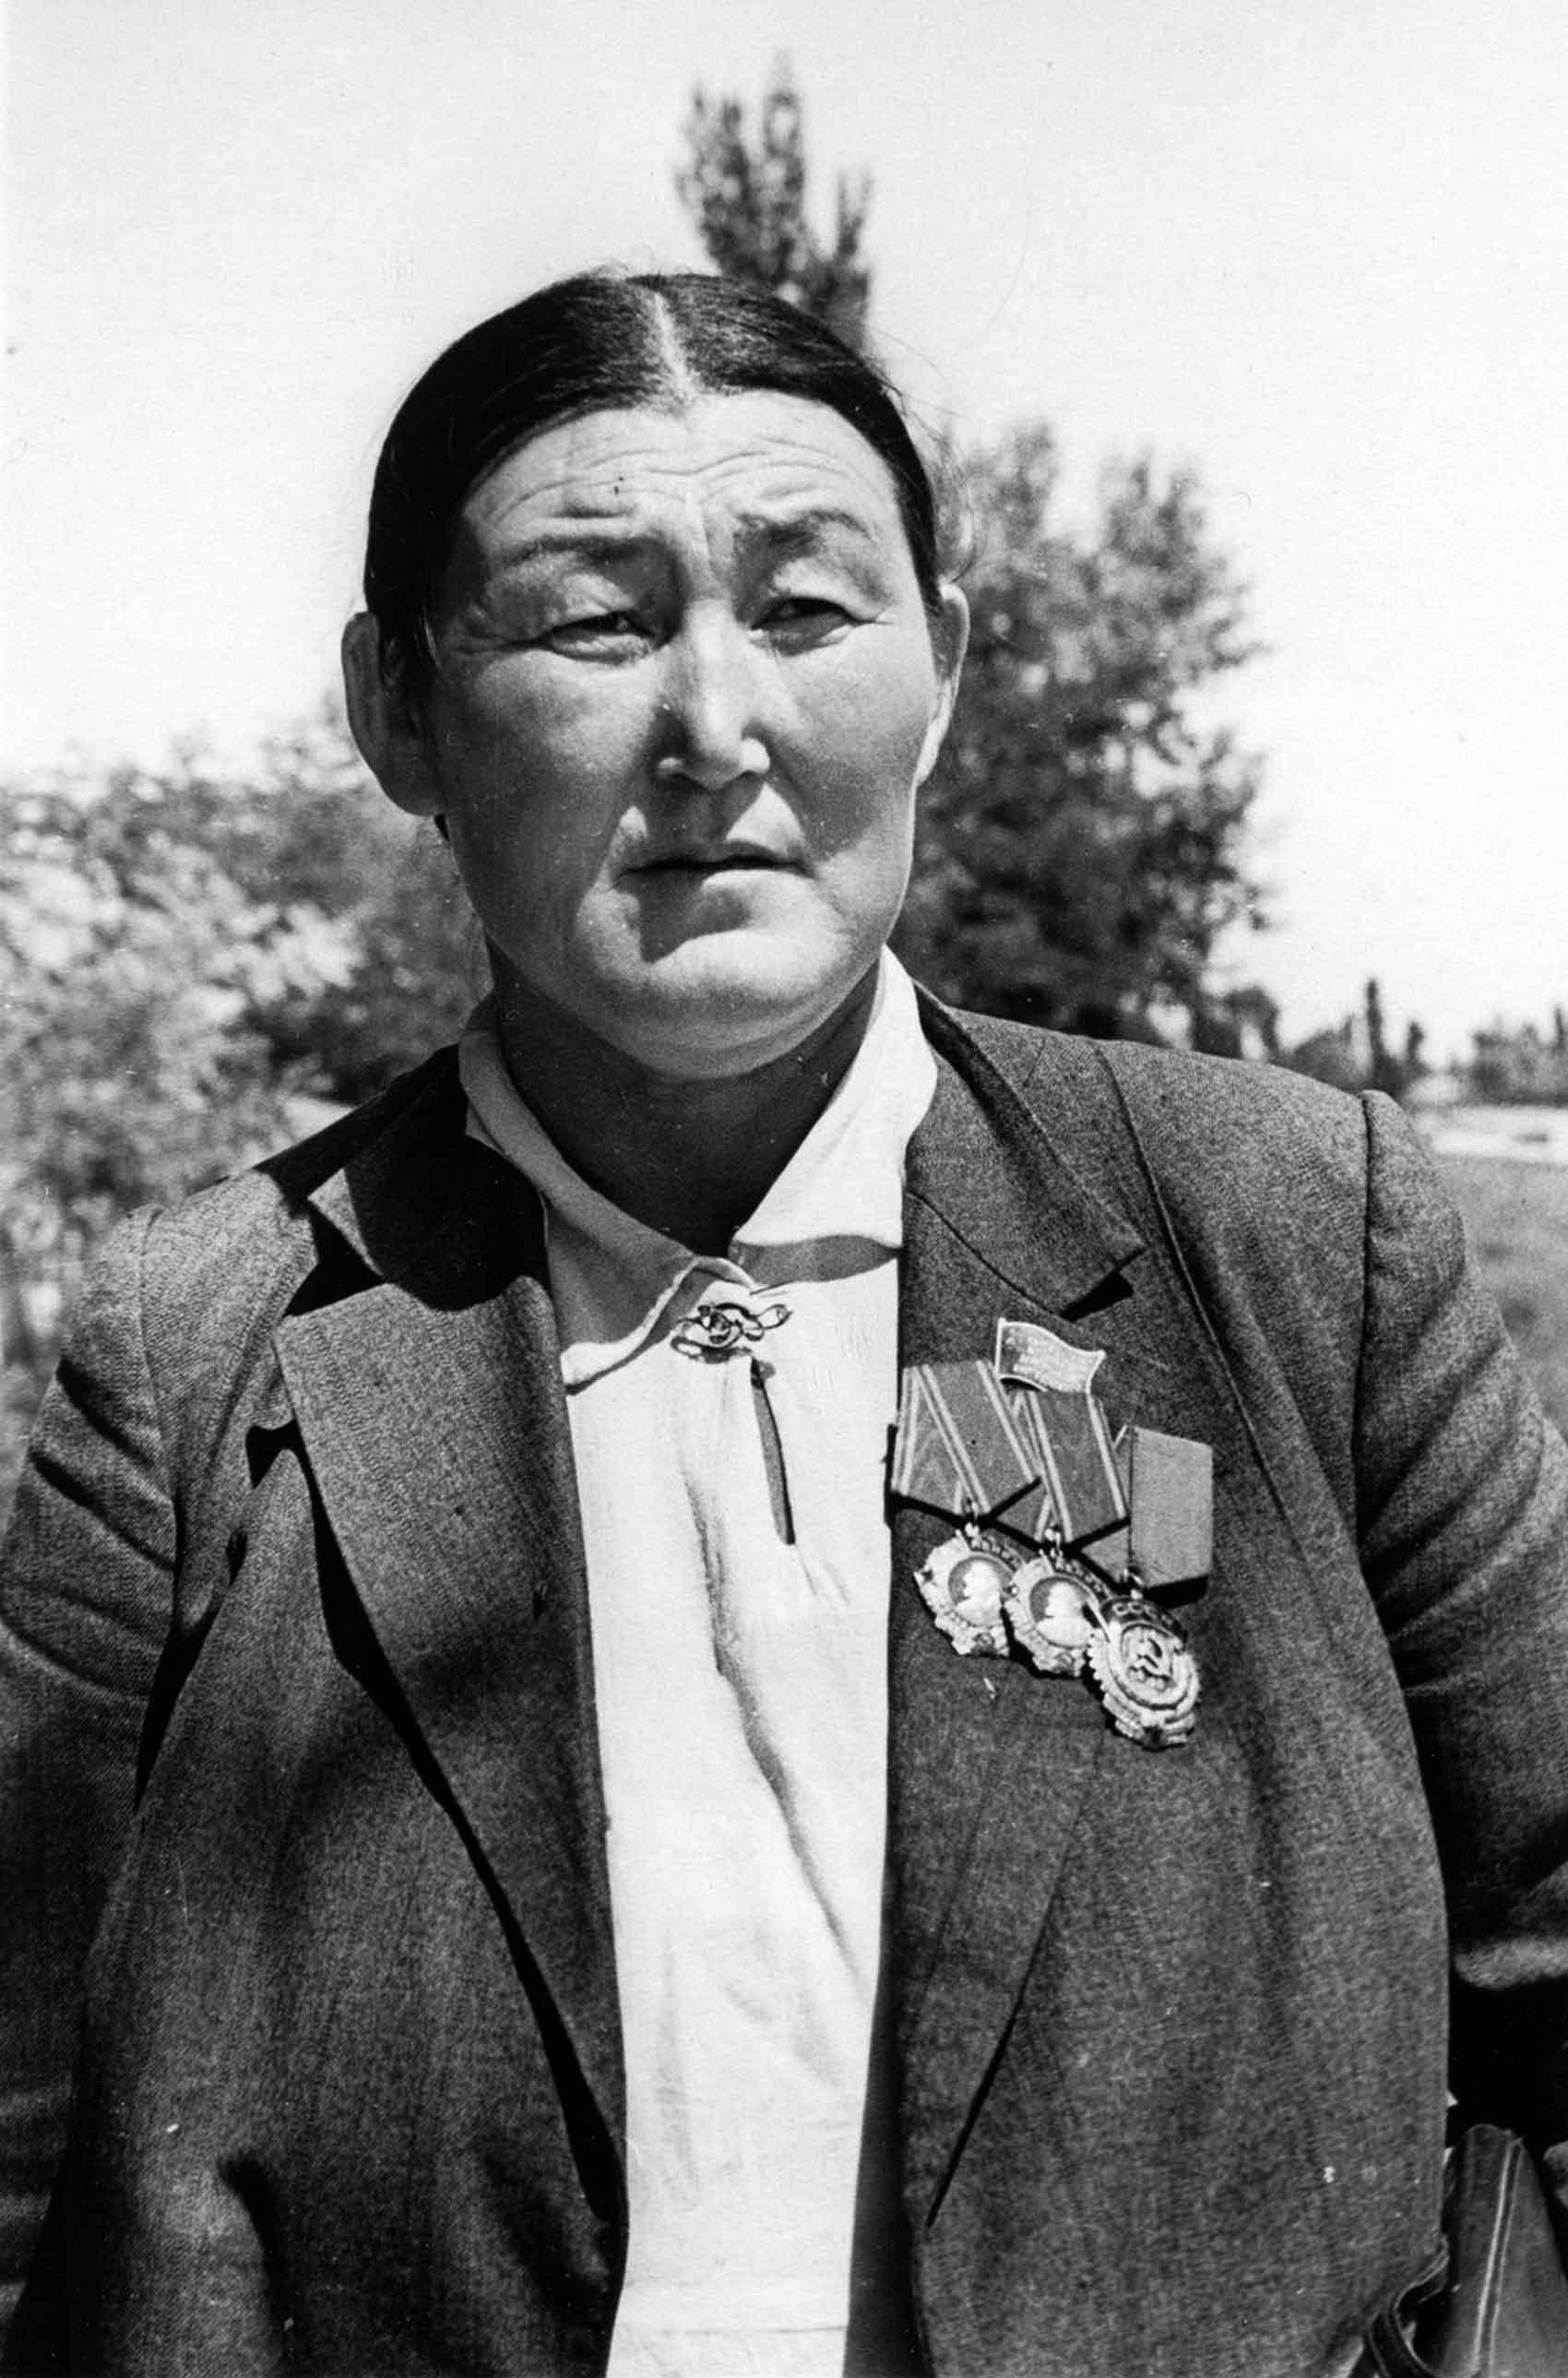 Kirgiz woman with medals on chest